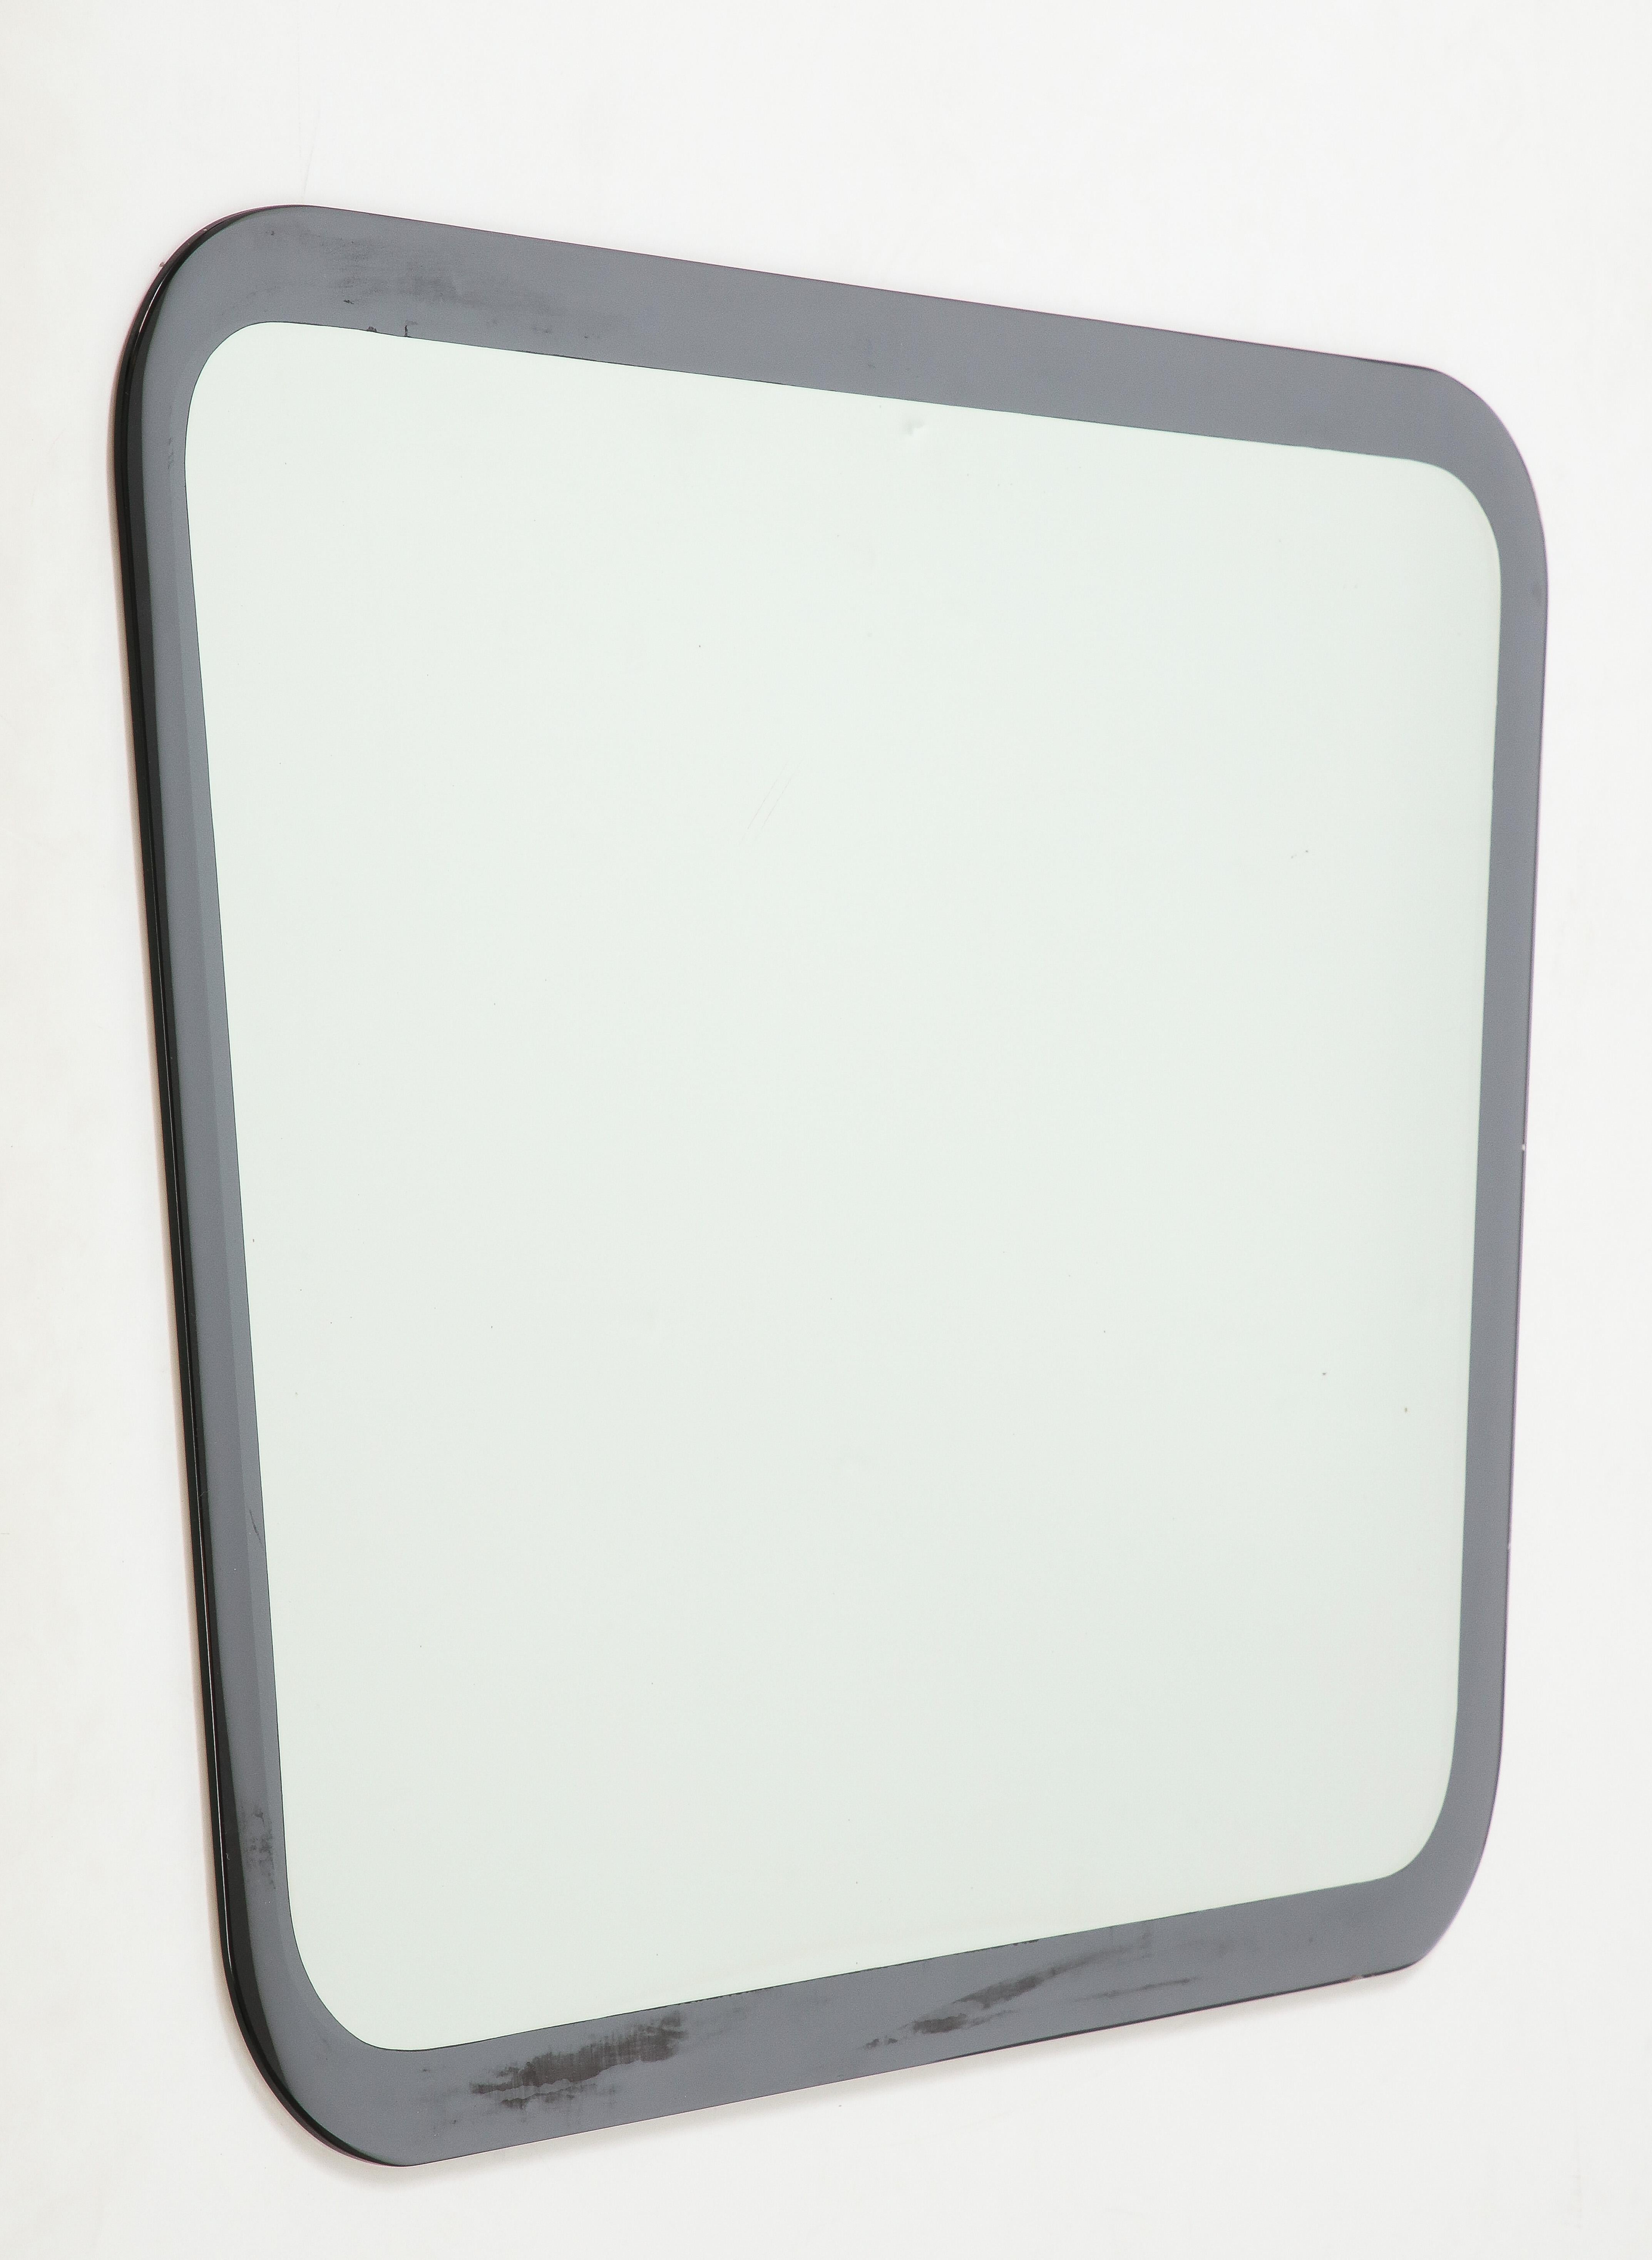 Metalvetro Siena Galvorame Wall Mirror, Italy, dated 1967  For Sale 7